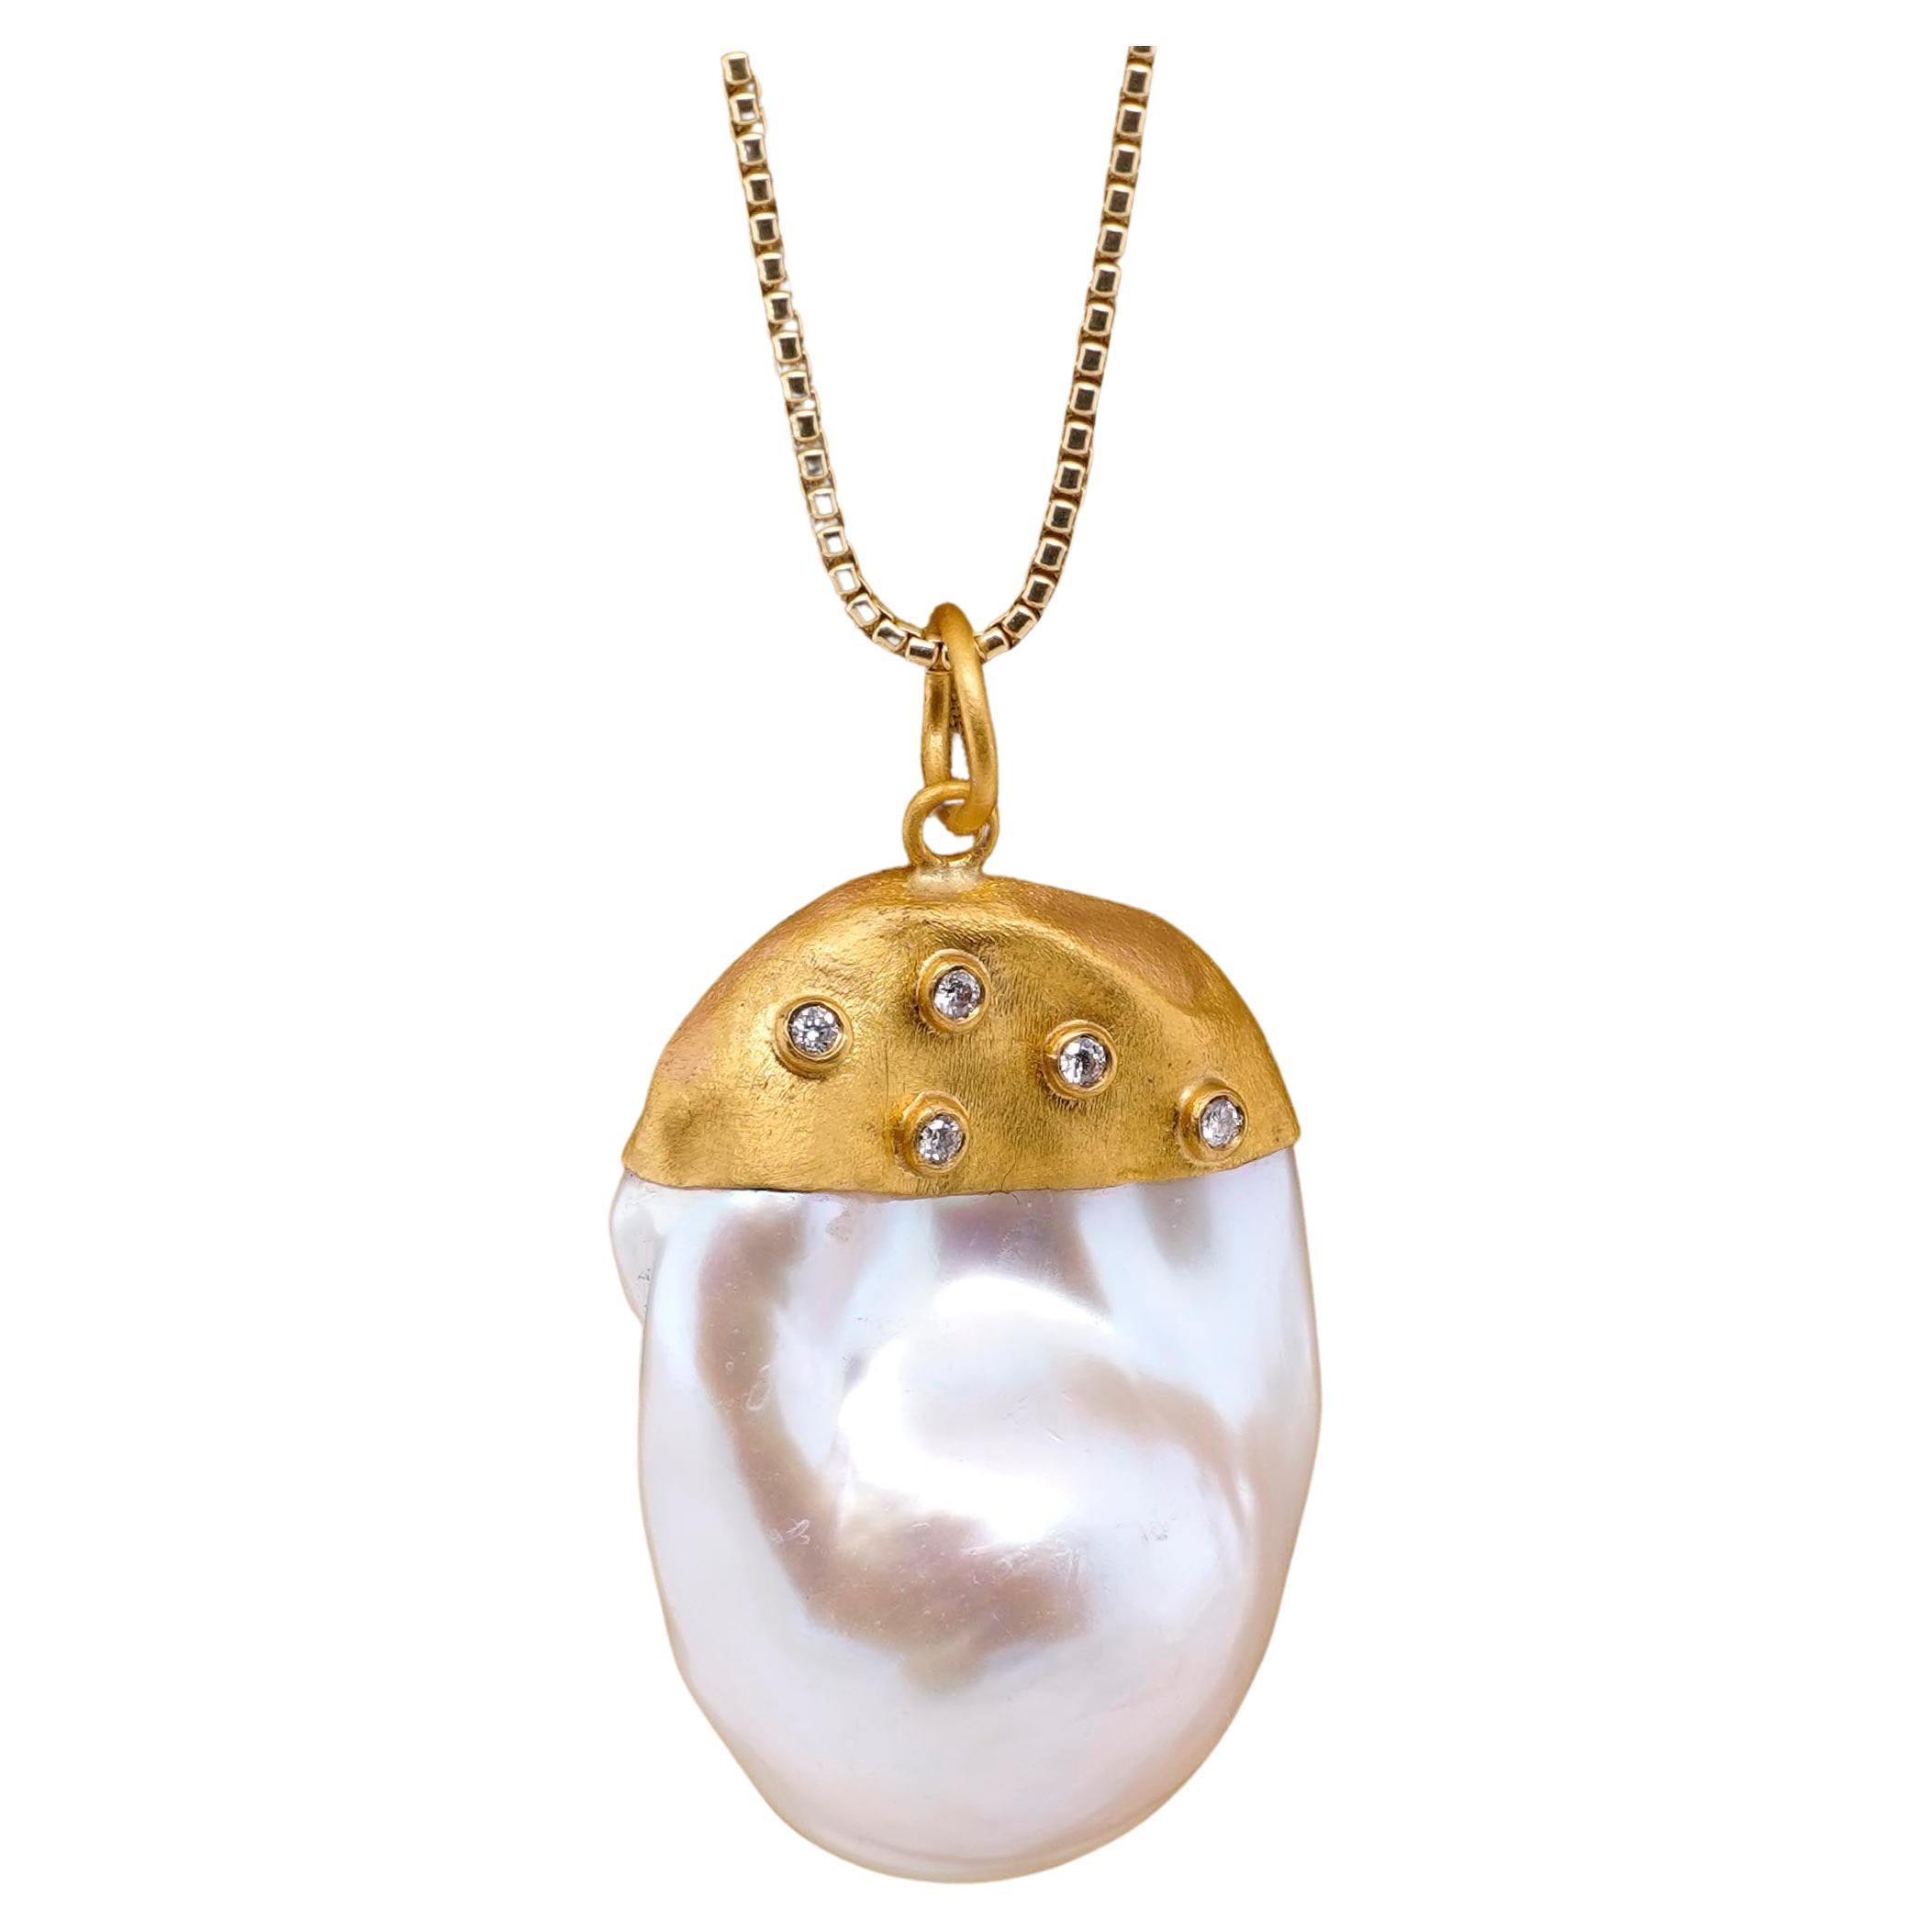 Large, 64ct Baroque Pearl Pendant Necklace with Diamonds, 24kt Solid Gold